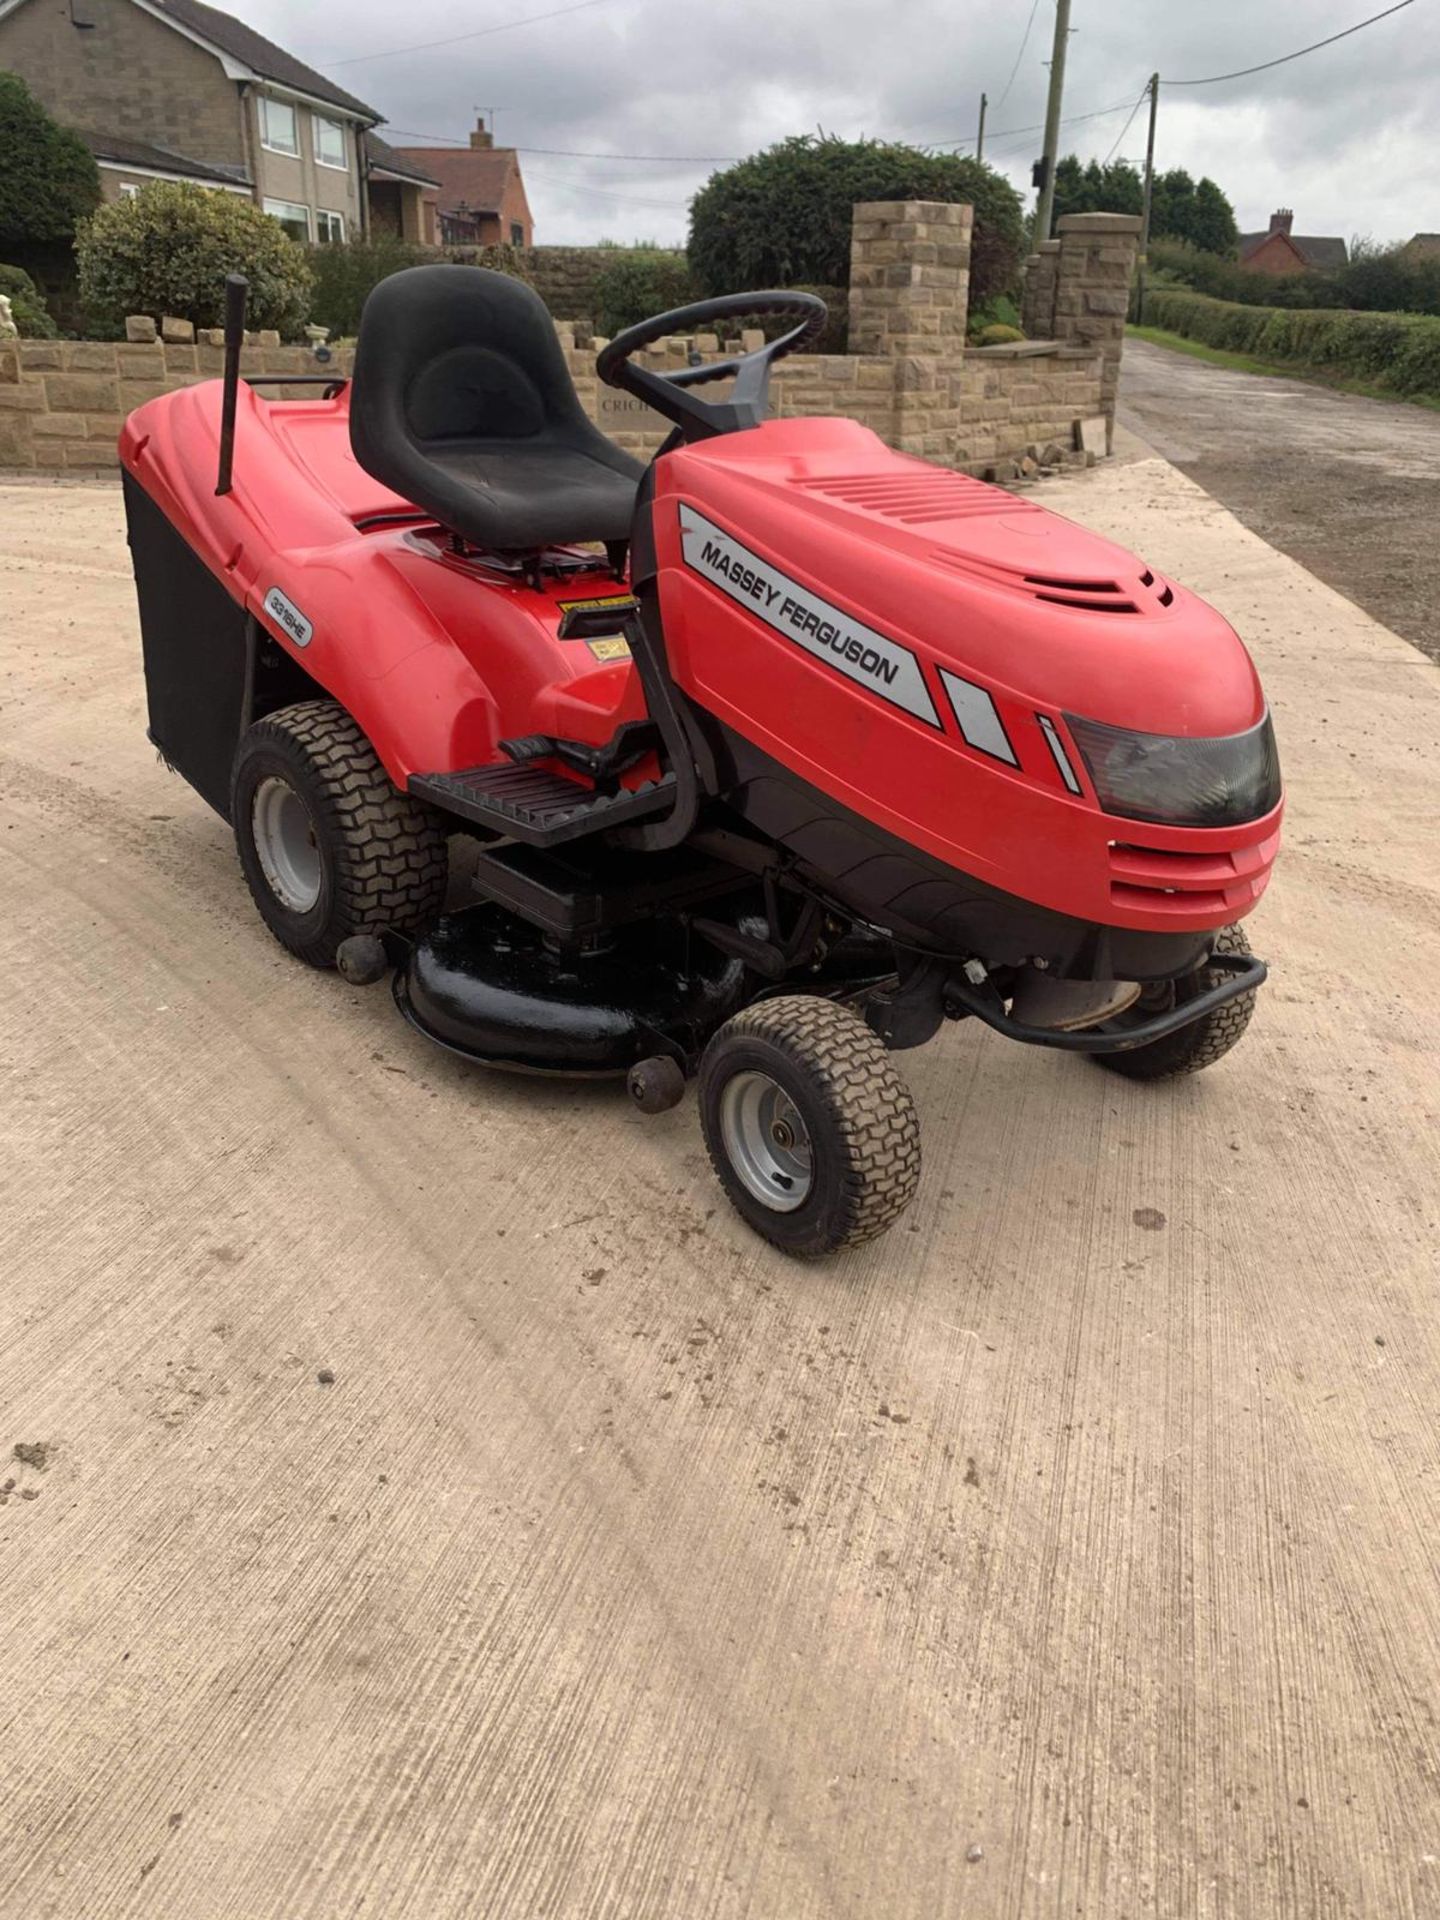 MASSEY FERGUSON 3316HE RIDE ON LAWN MOWER, RUNS, DRIVES AND CUTS, CLEAN MACHINE, C/W COLLECTOR